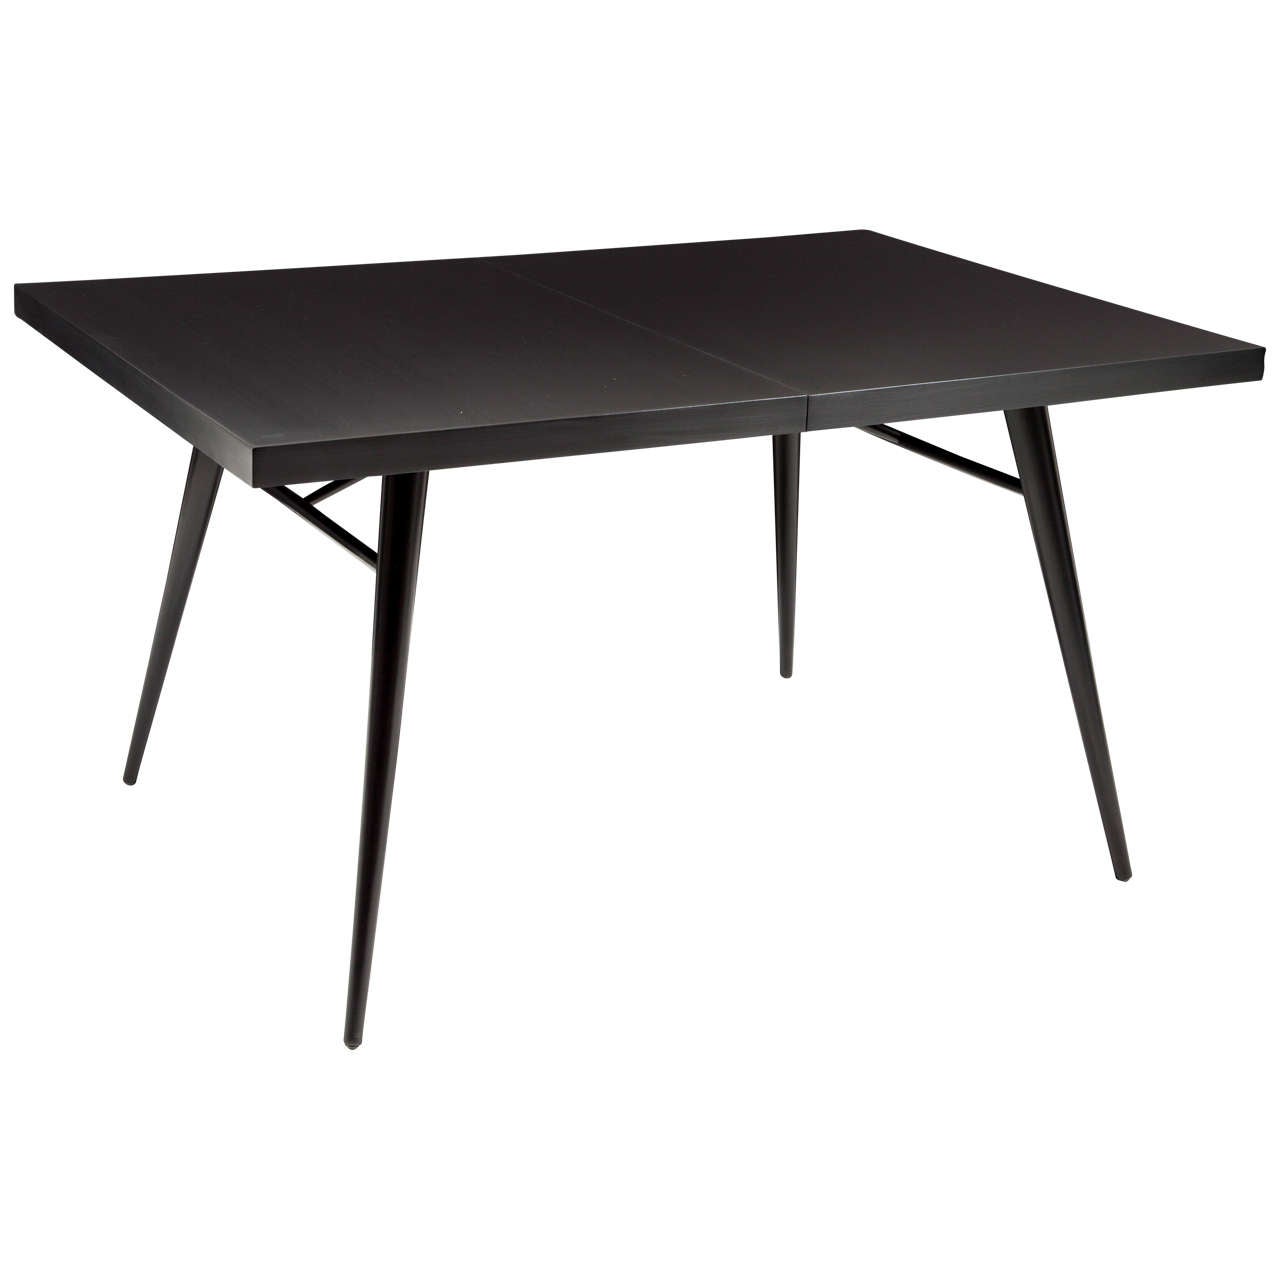 Paul McCobb Planner Group Extension Dining Table